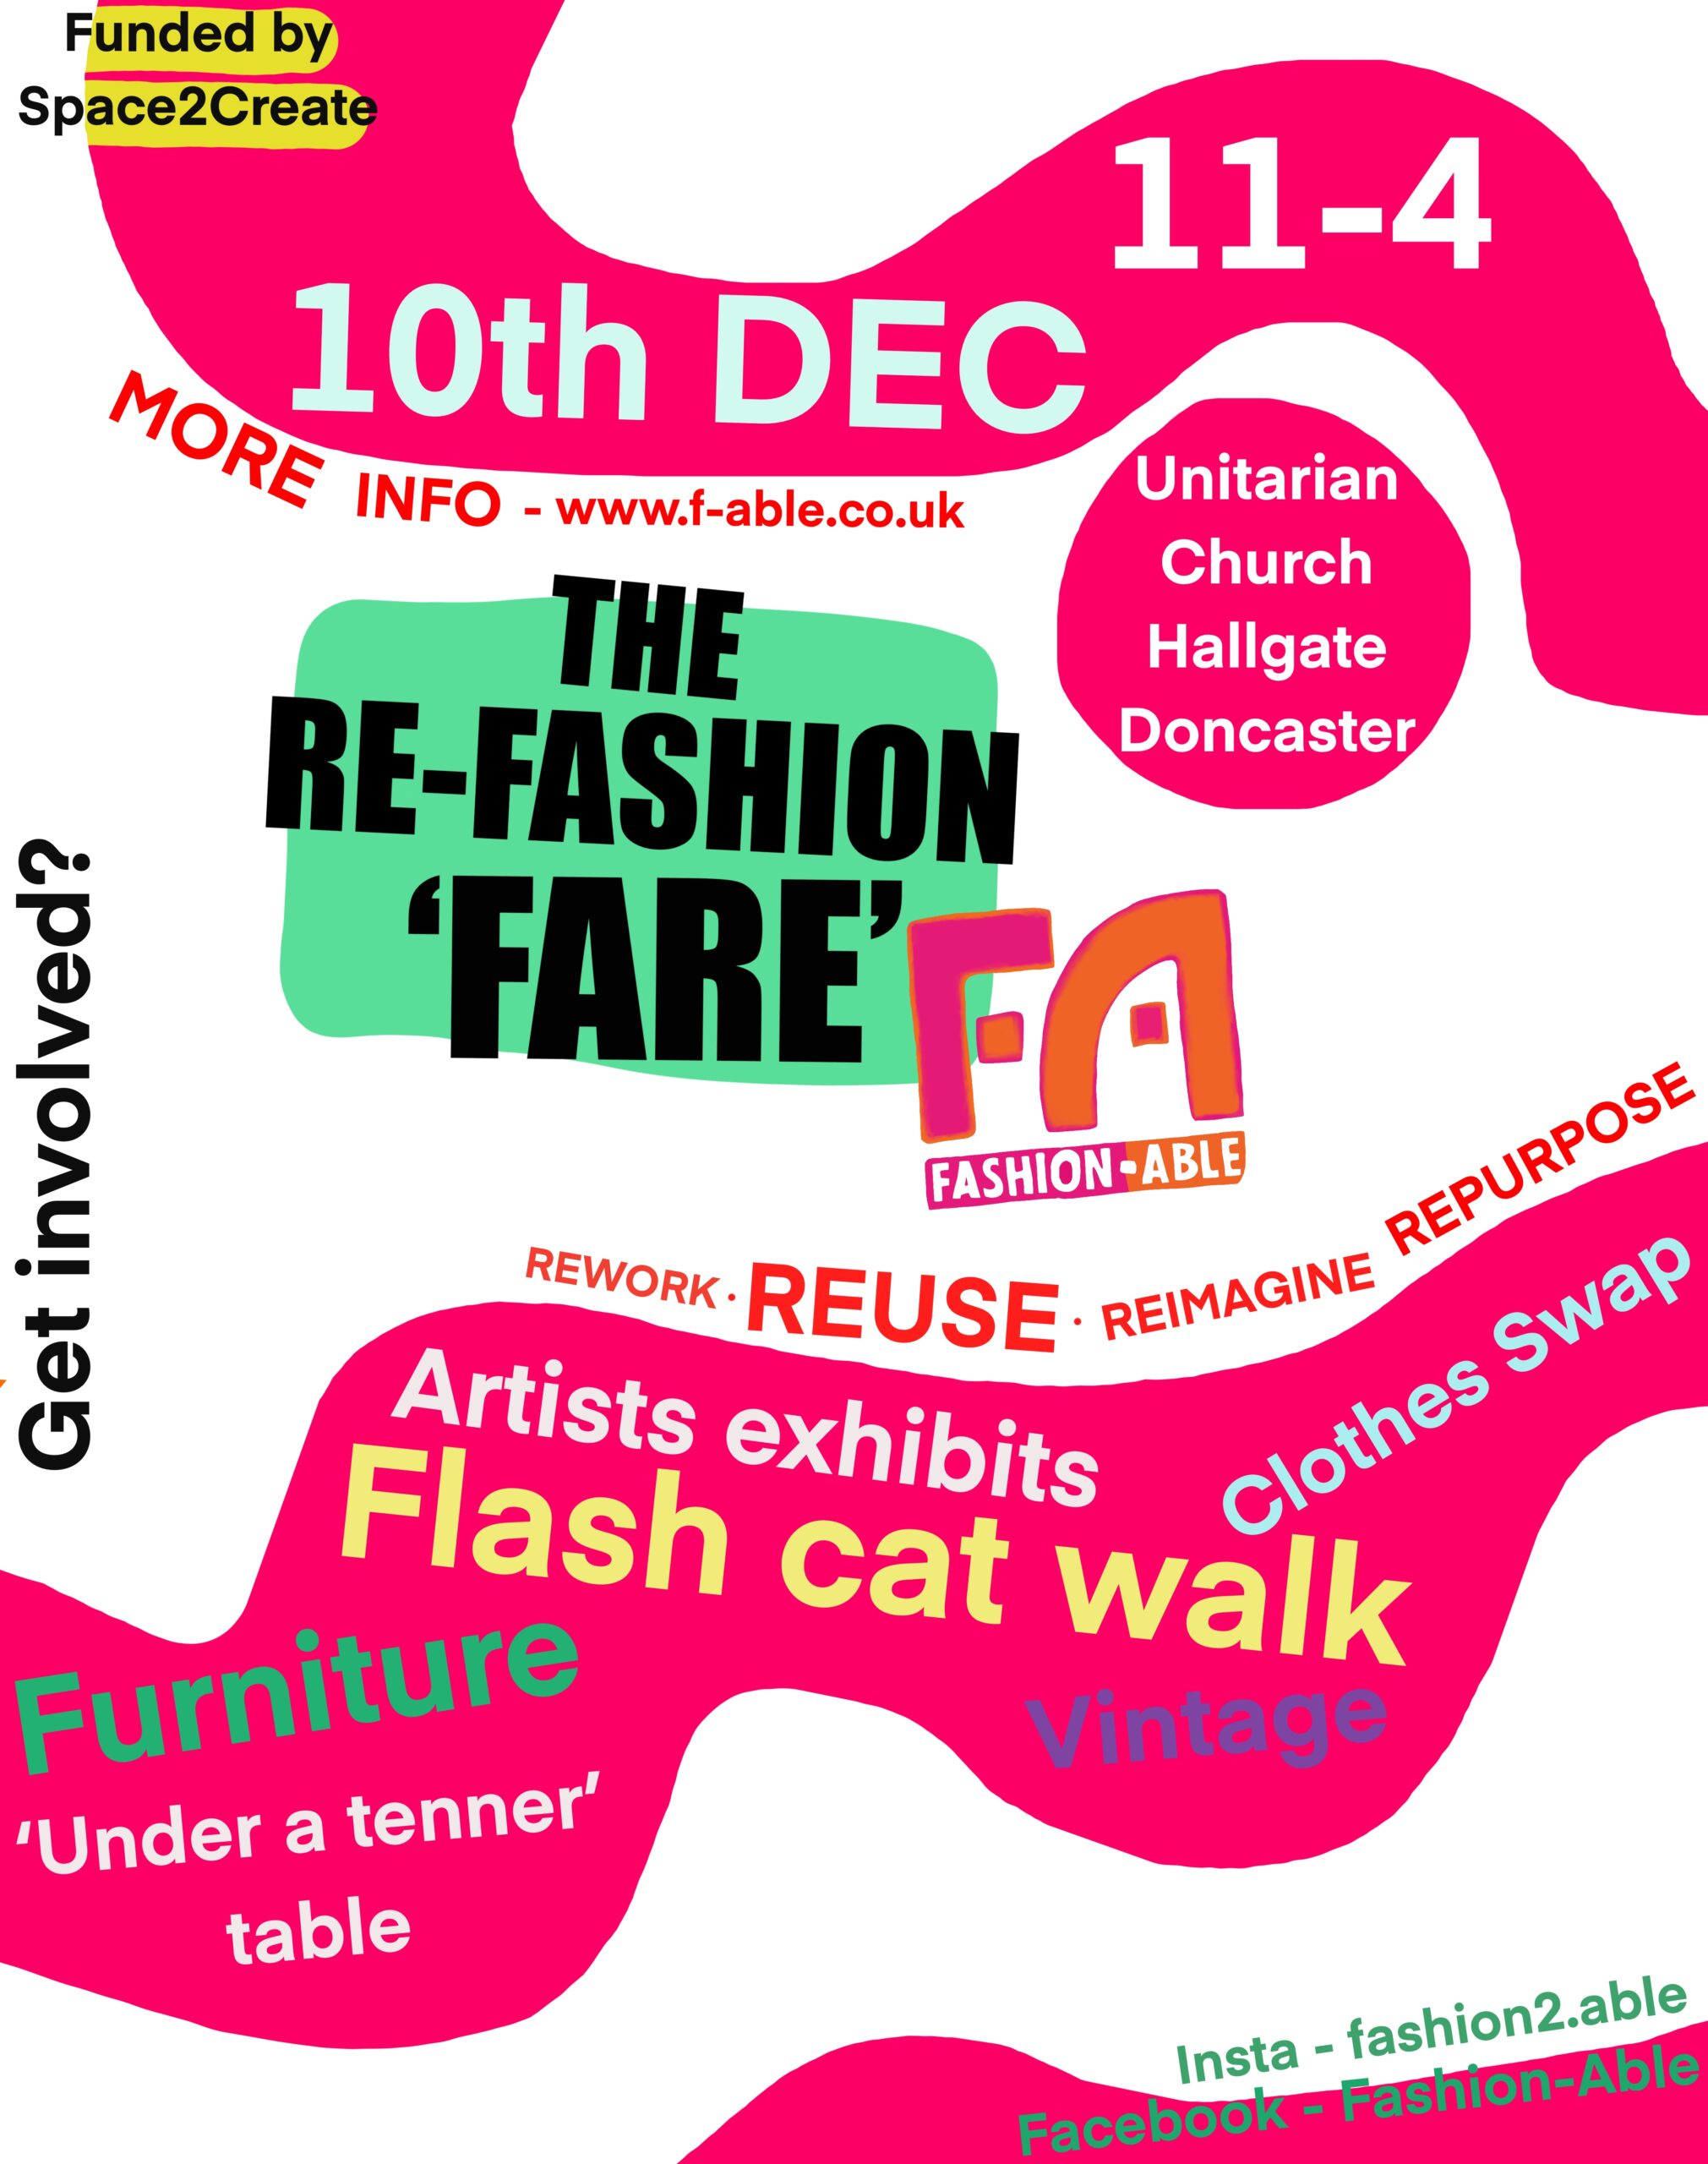 Poster to advertise the Re-Fashion Fare